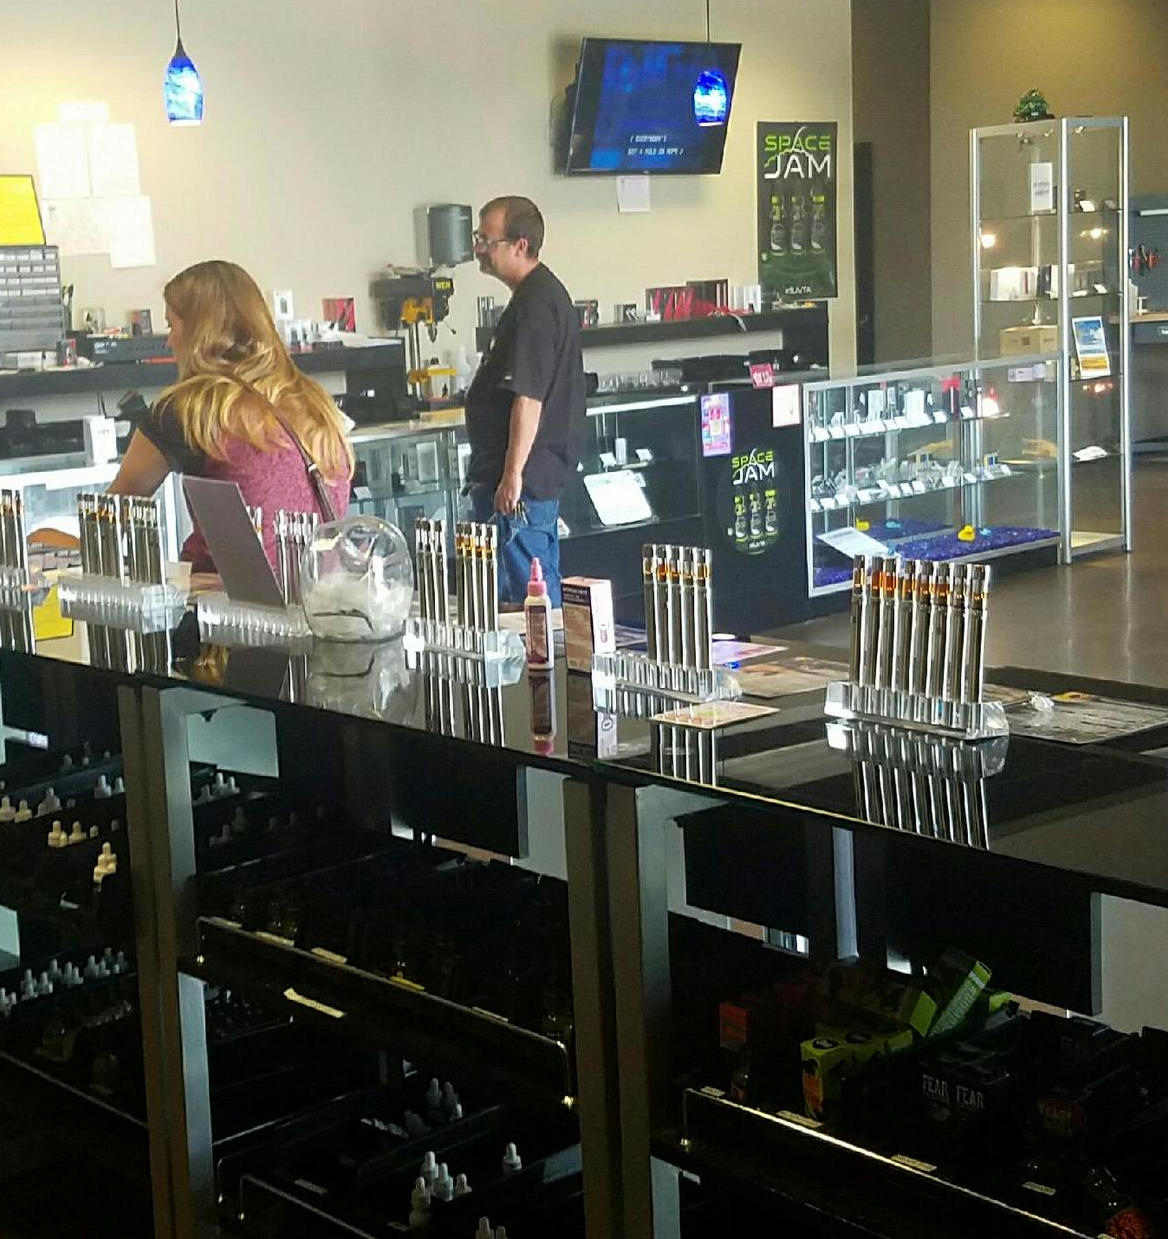 An Inside Look at One of Aqueous Vapor’s Midwest Shops With a Diverse Display of Vape Pens & More!